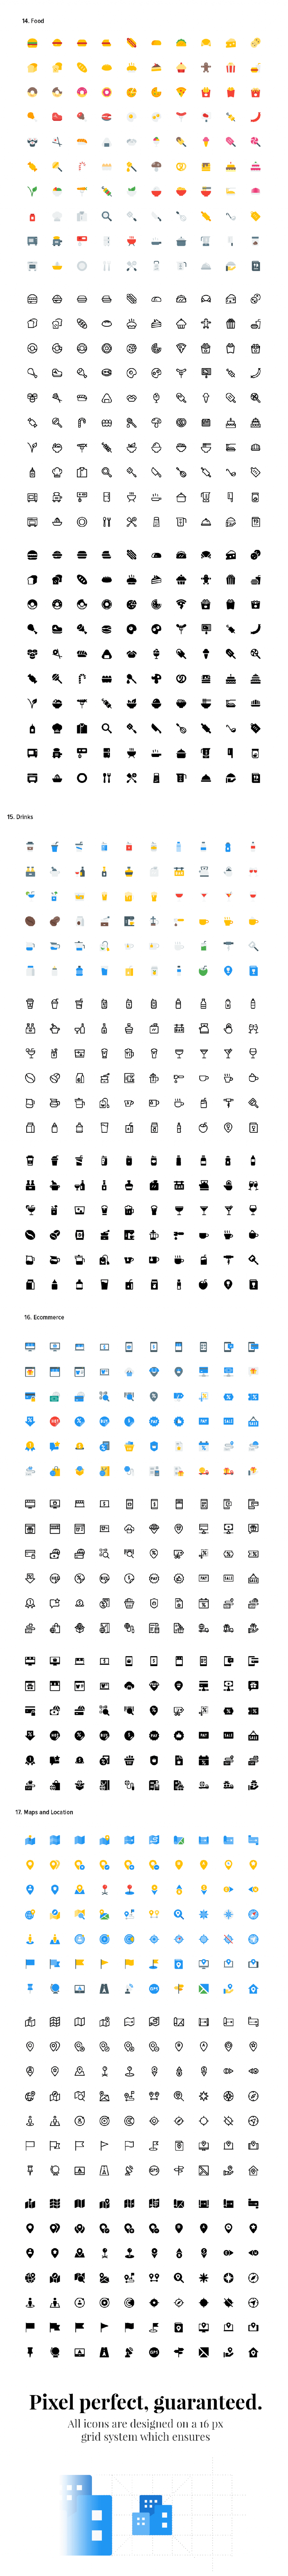 6,500 Unique Icons from Pixelicons